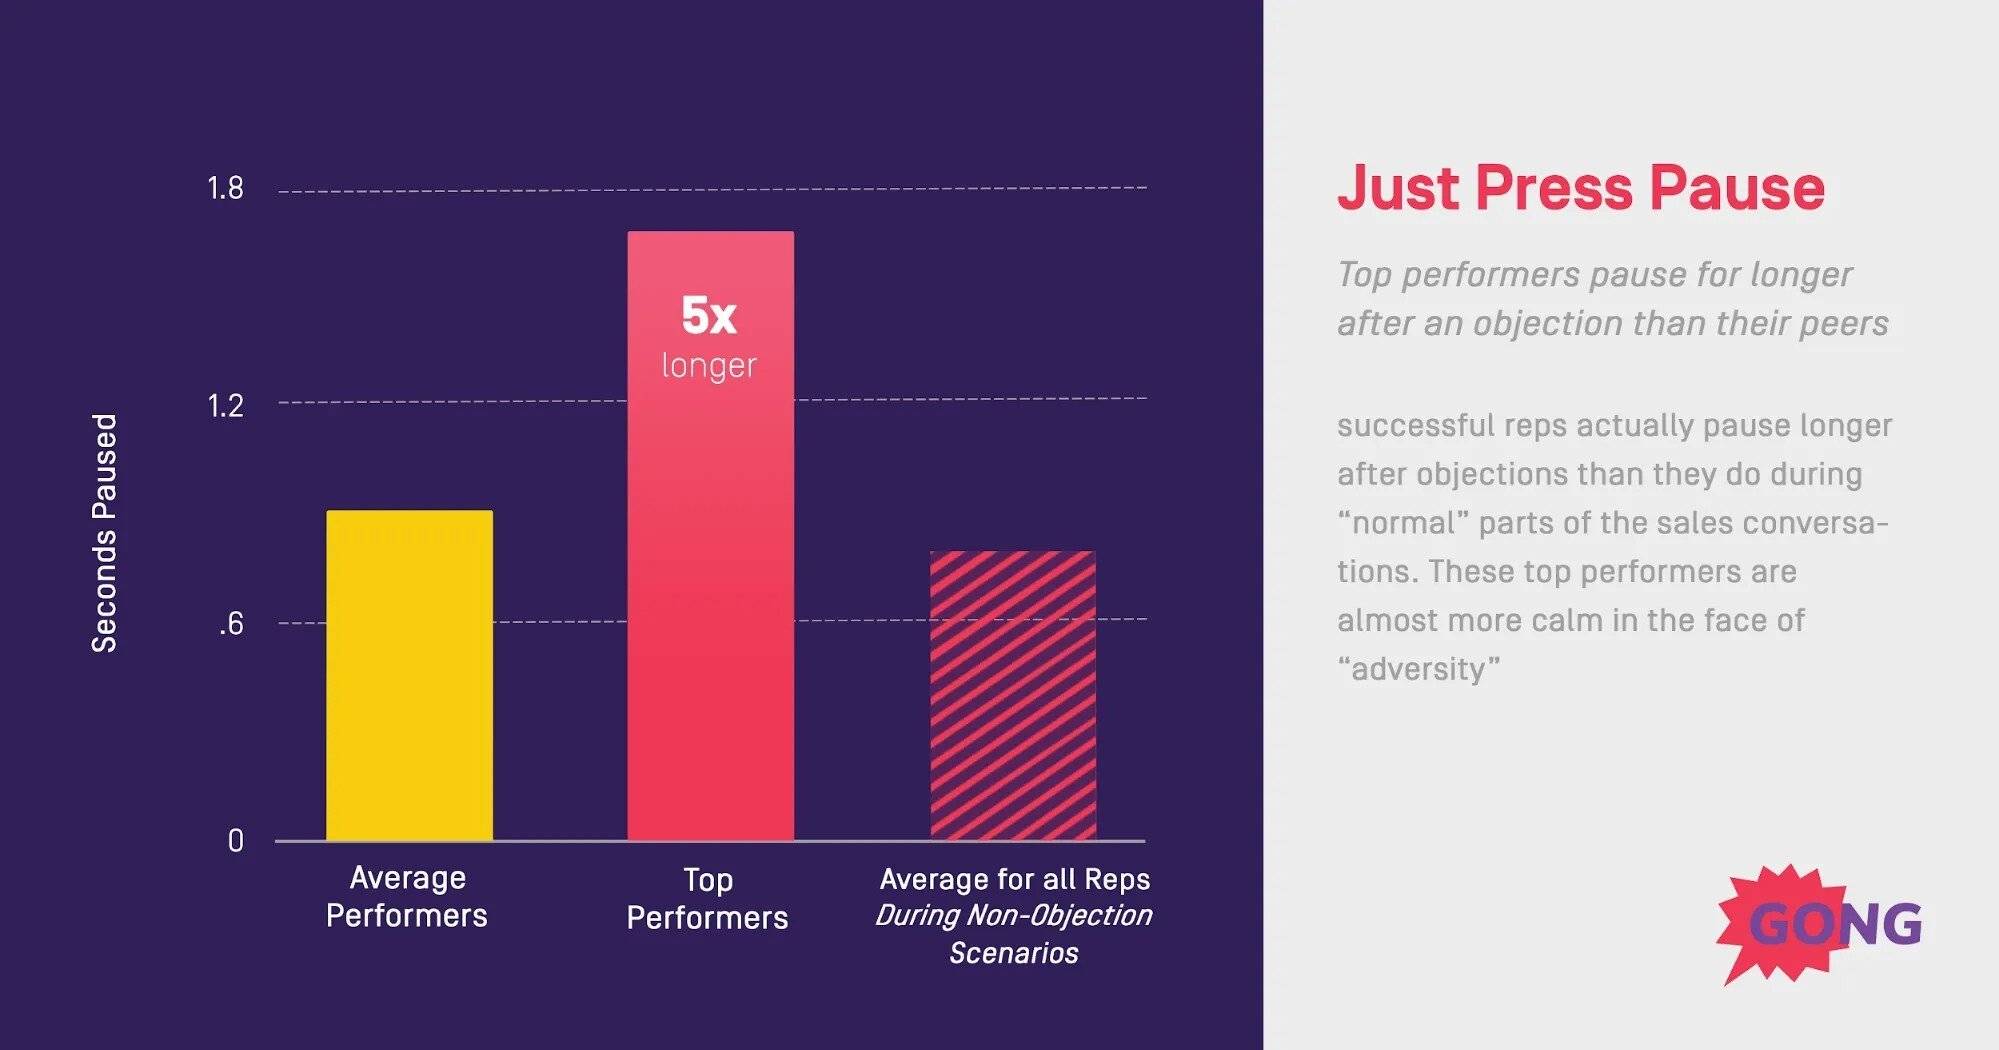 Bar graph showing how top sales performers pause for longer after a sales objection.